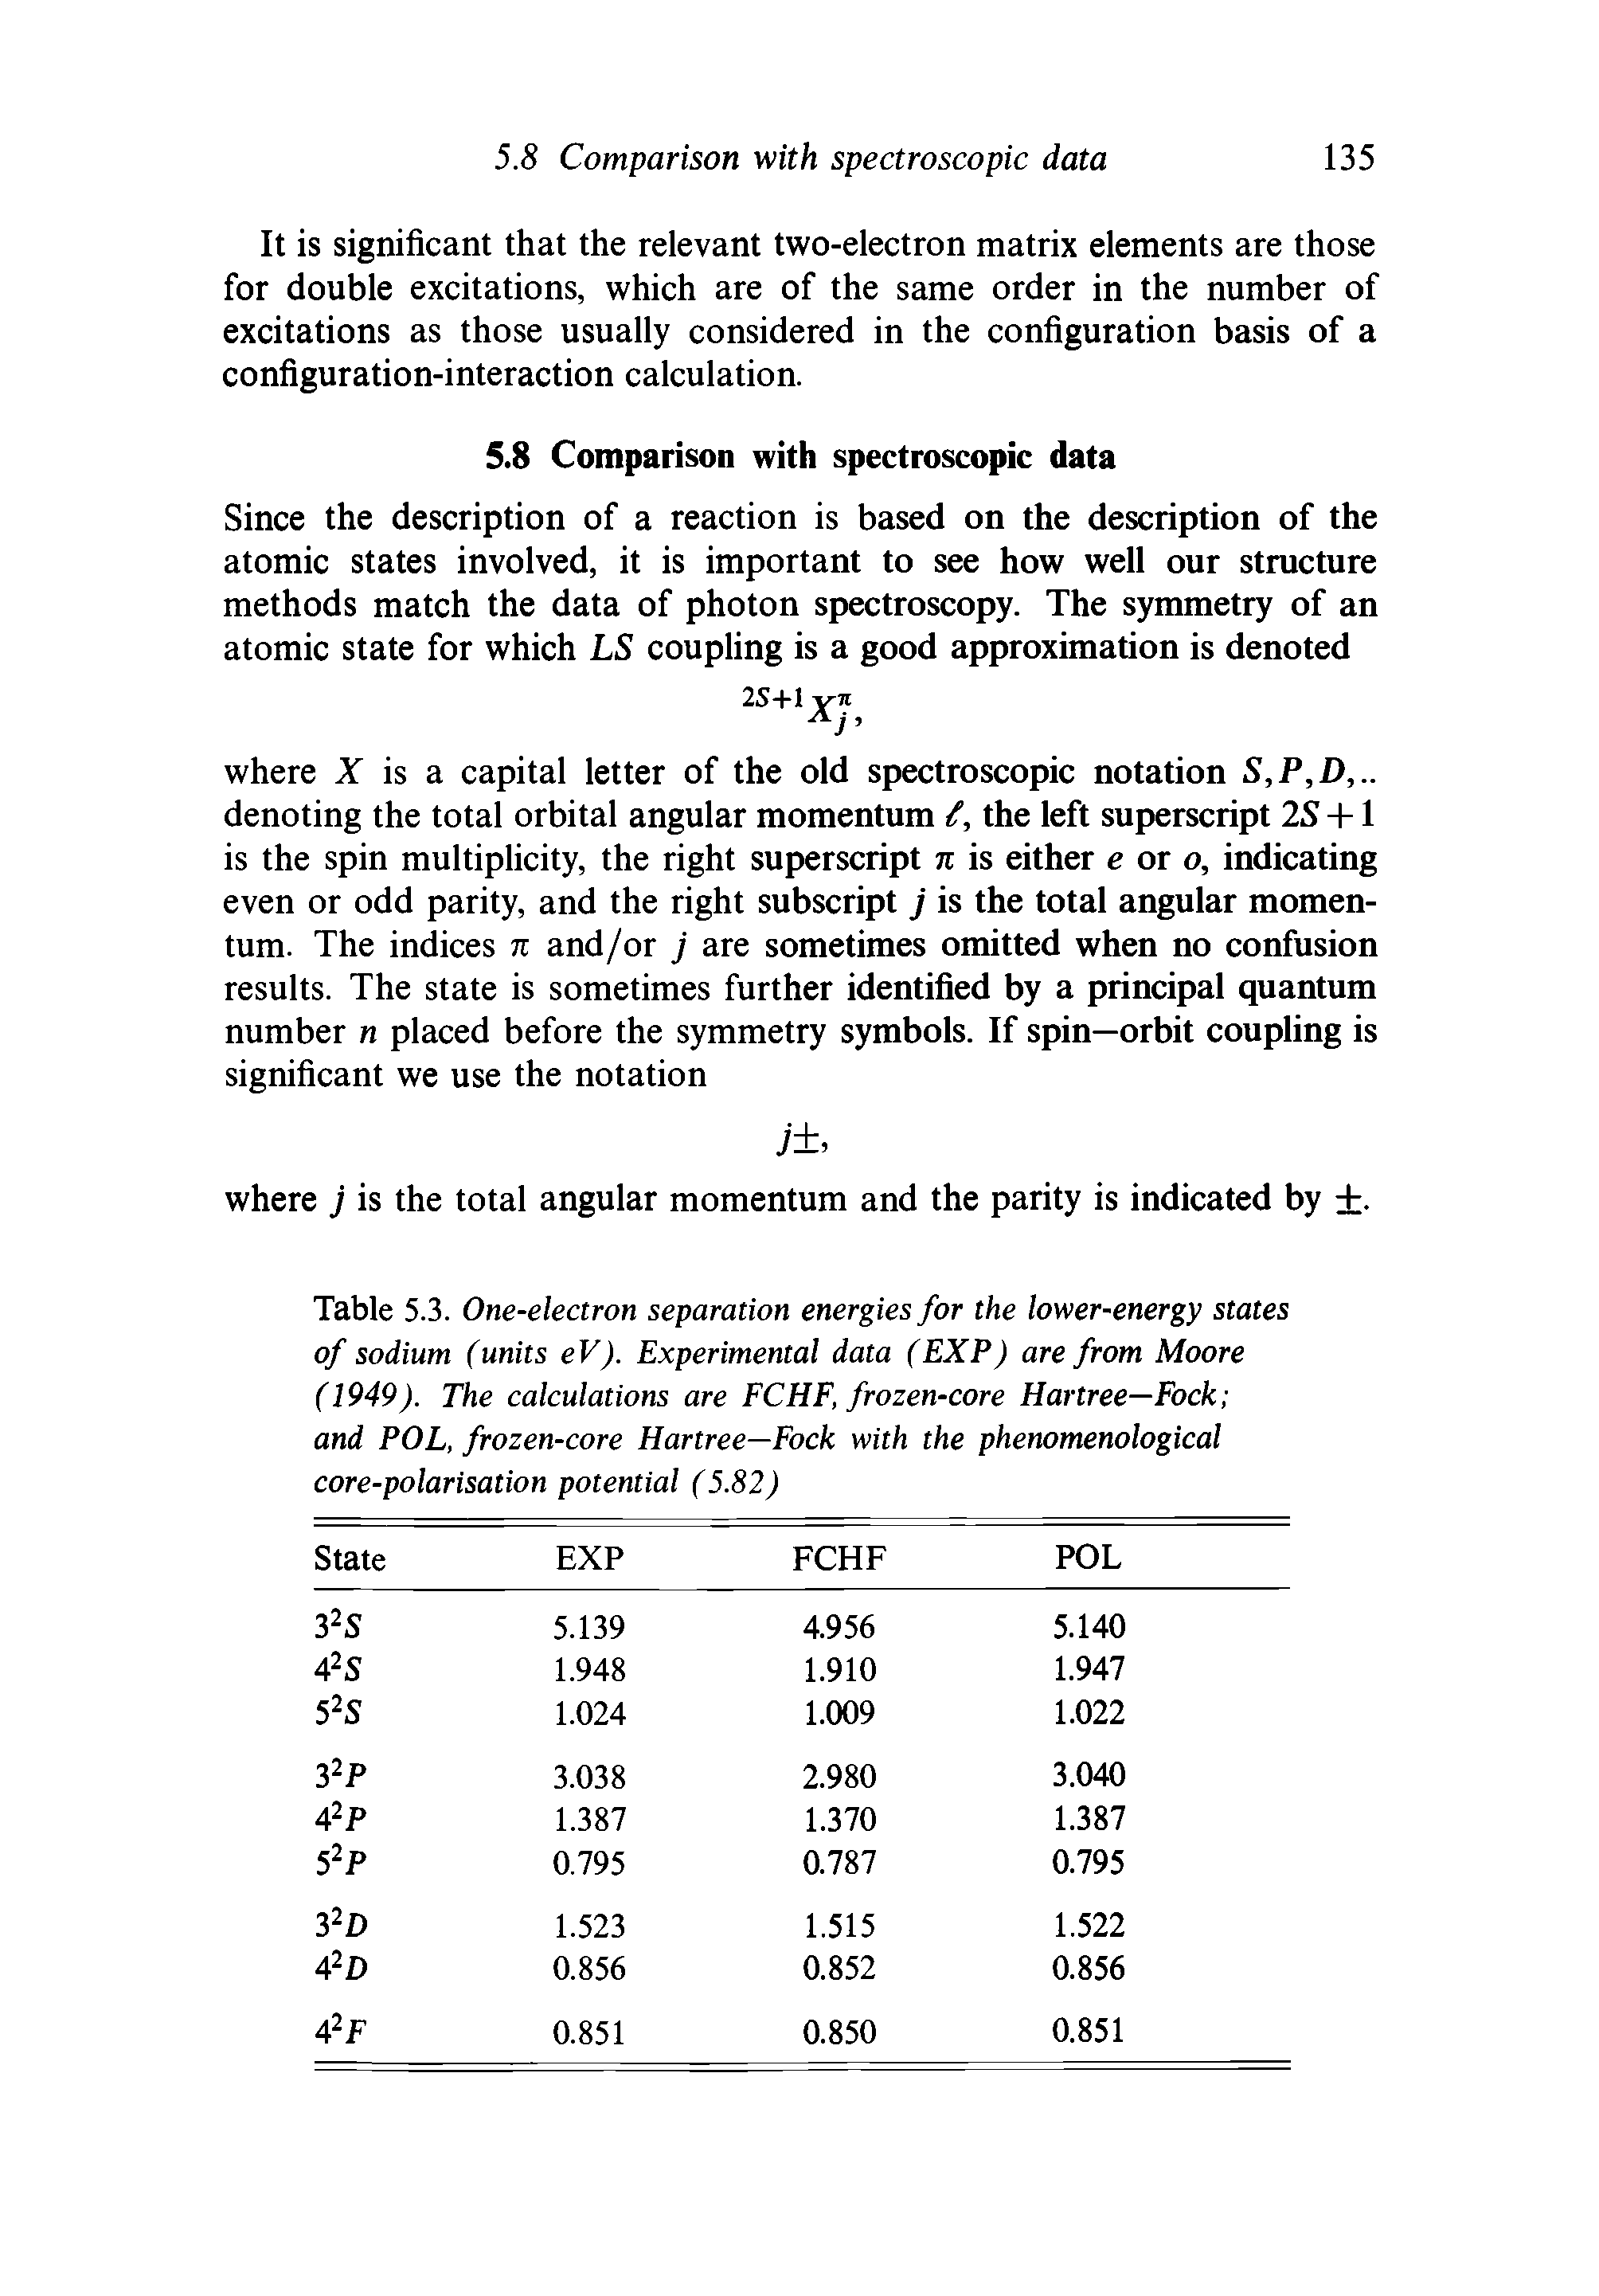 Table 5.3. One-electron separation energies for the lower-energy states of sodium (units eV). Experimental data (EXP) are from Moore (1949). The calculations are FCHE, frozen-core Hartree—Fock and POL, frozen-core Hartree—Fock with the phenomenological core-polarisation potential (5.82)...